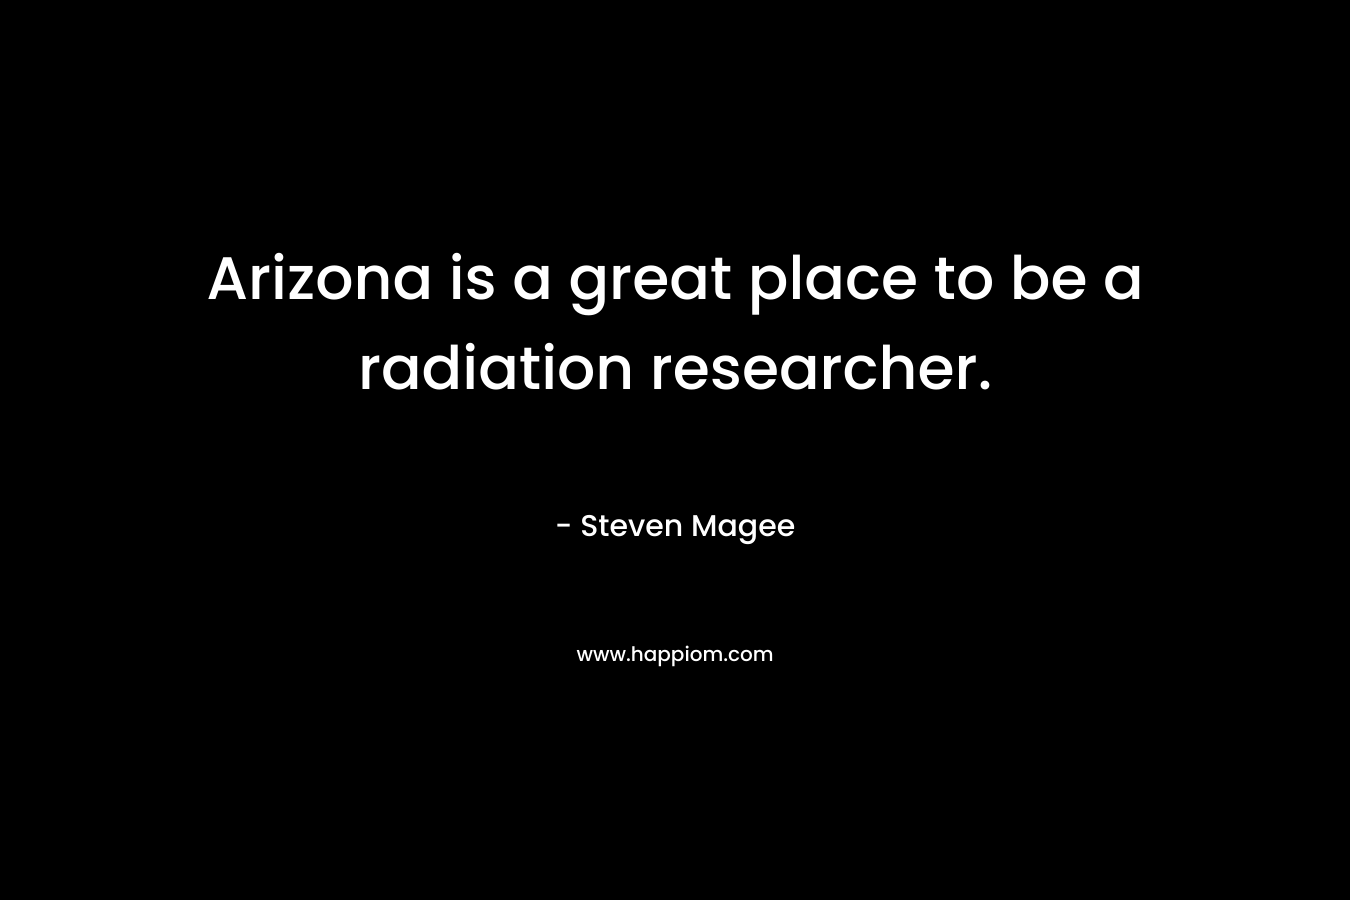 Arizona is a great place to be a radiation researcher. – Steven Magee